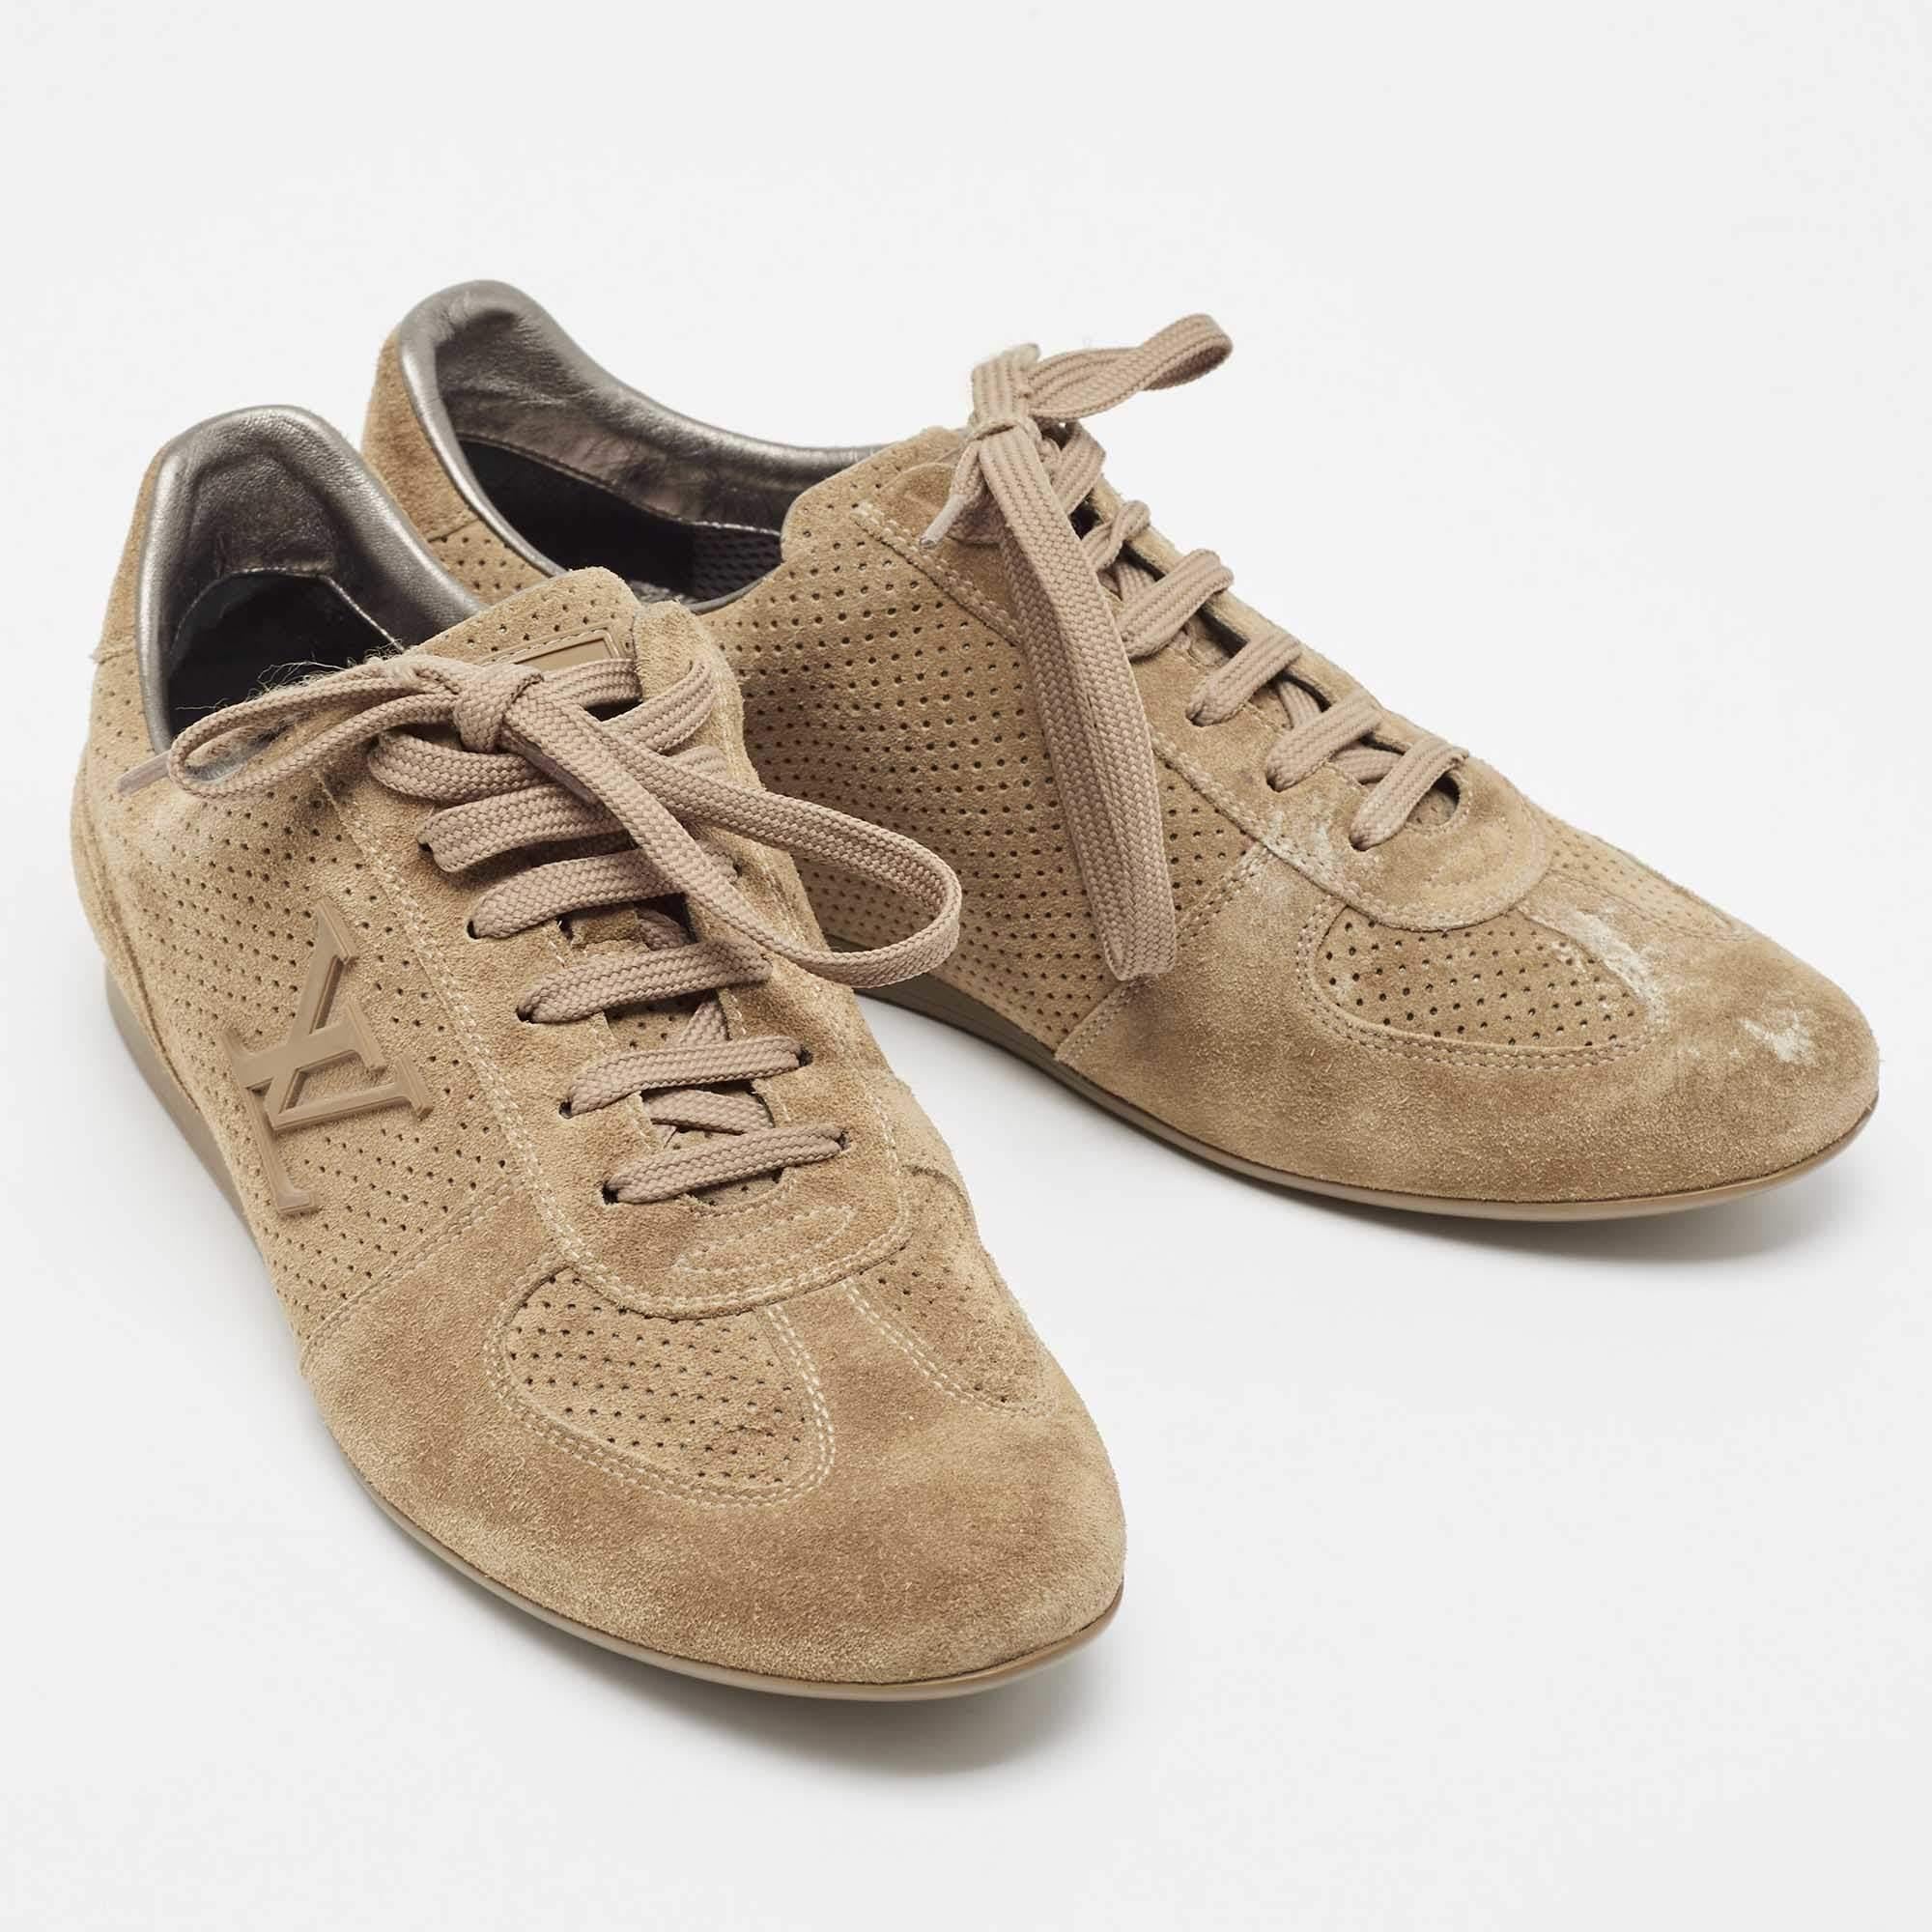 Louis Vuitton Beige Perforated Suede Low Top Sneakers Size 38 In Good Condition For Sale In Dubai, Al Qouz 2